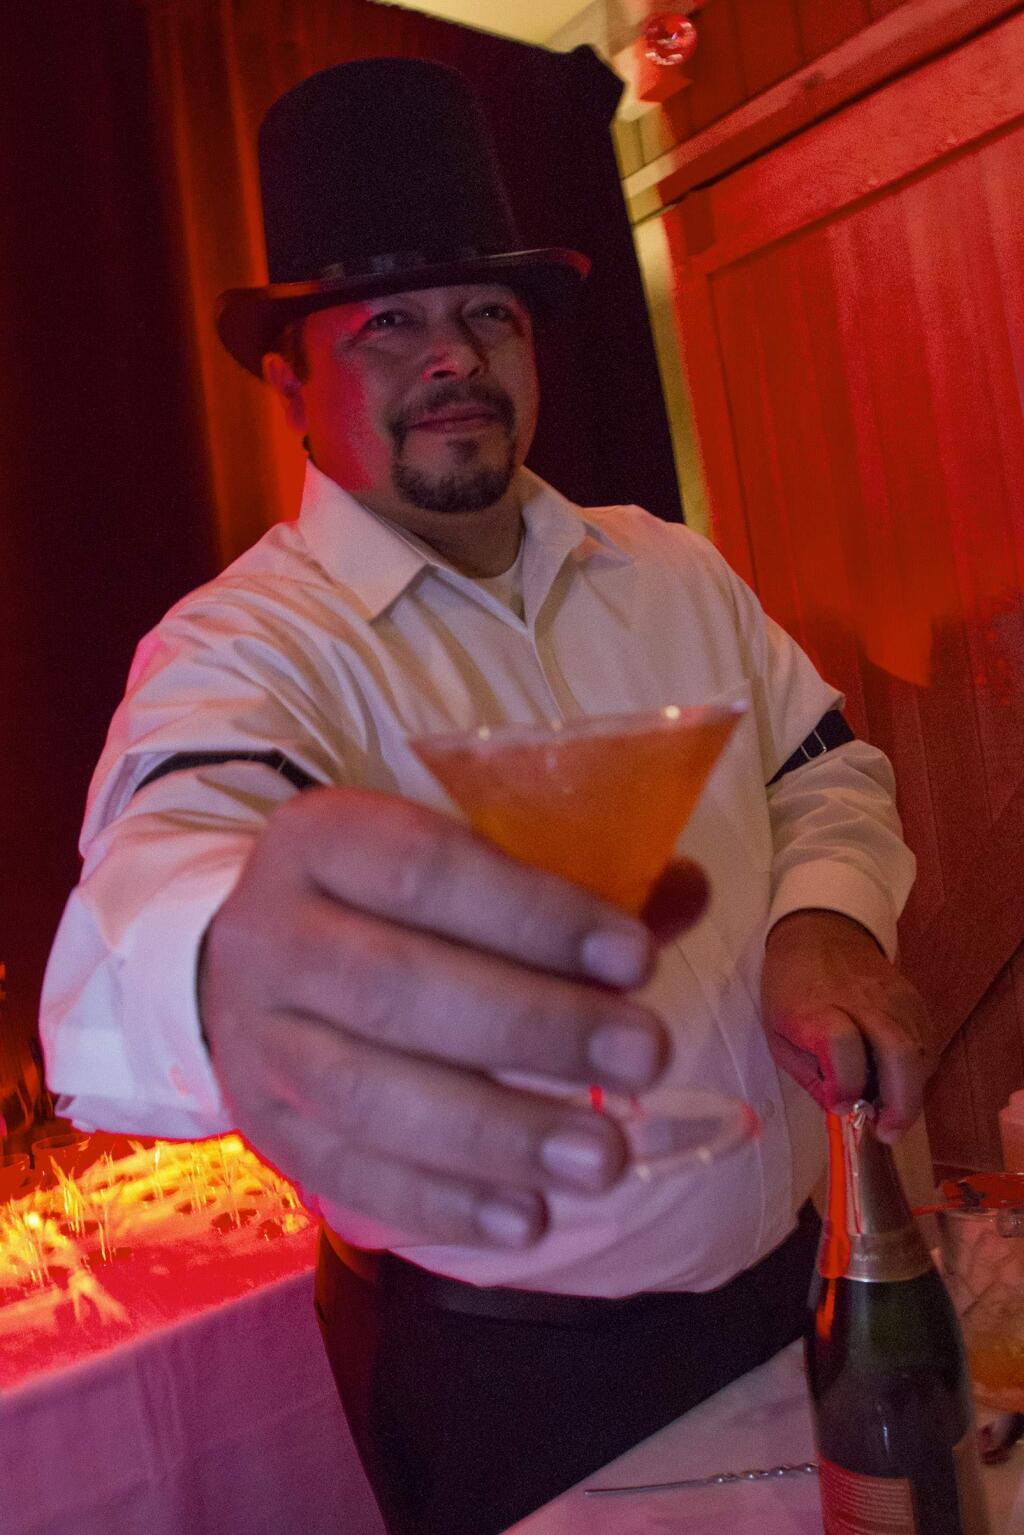 Gerard Stephens offers a martini from Carneros Bistro. Martini Madness took place again this year at MacArthur Place Inn and Spa on Friday, Jan 13. Bartenders from local Sonoma Valley restaurants presented their martini concoctions to a sold-out crowd. (Photo by Robbi Pengelly/Index-Tribune)